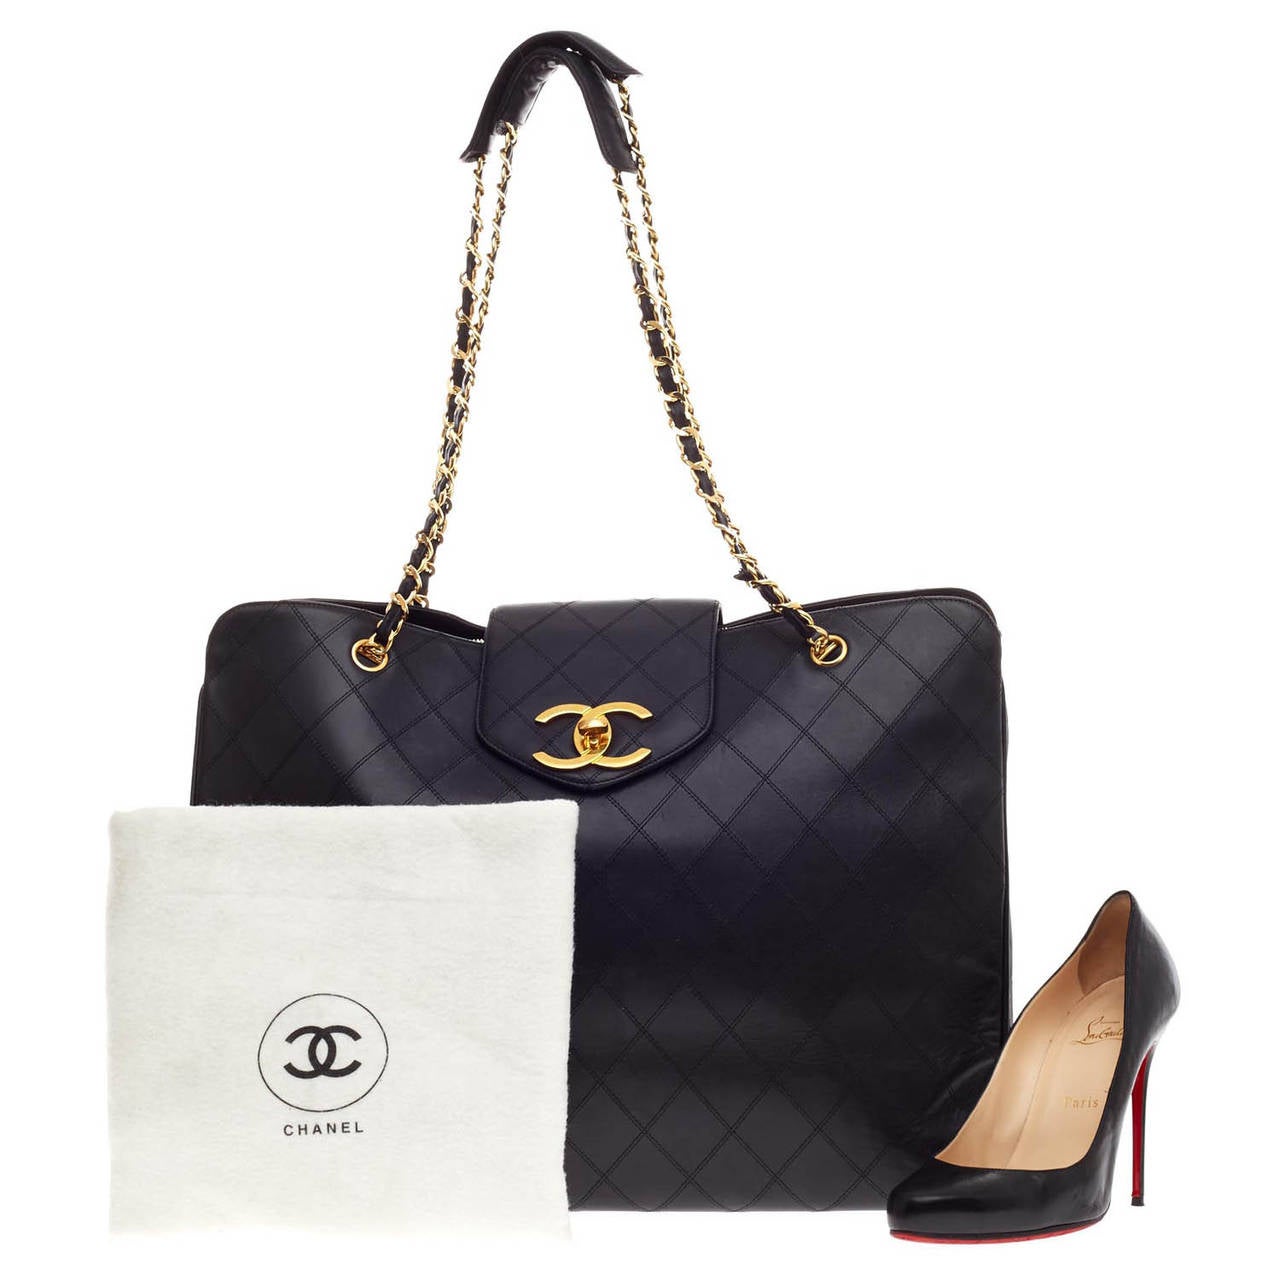 This rare authentic Chanel Supermodel Weekender size Jumbo in black diamond quilted leather is a stylish solution to all your travel needs. This oversized tote is accented with Chanel's signature leather woven chain straps and accompanied with